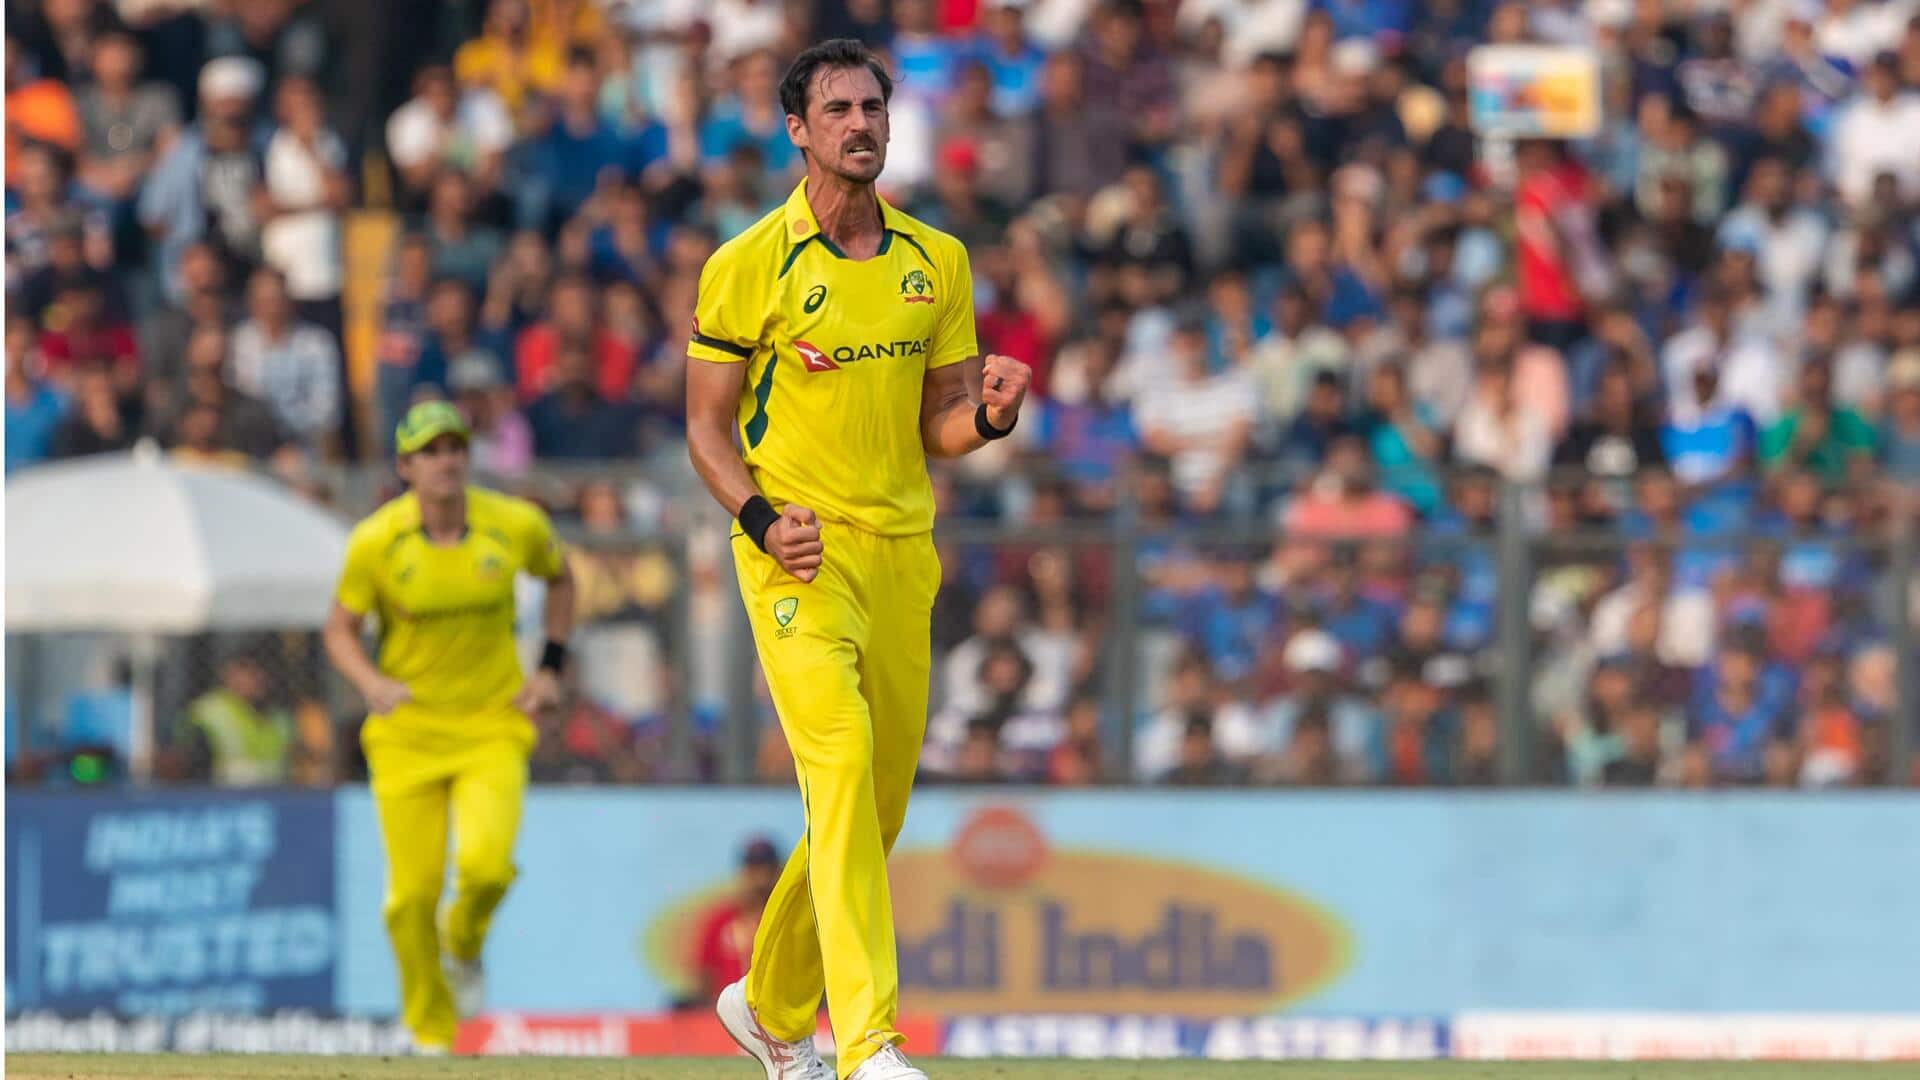 Mitchell Starc fastest to complete 50 World Cup wickets: Stats